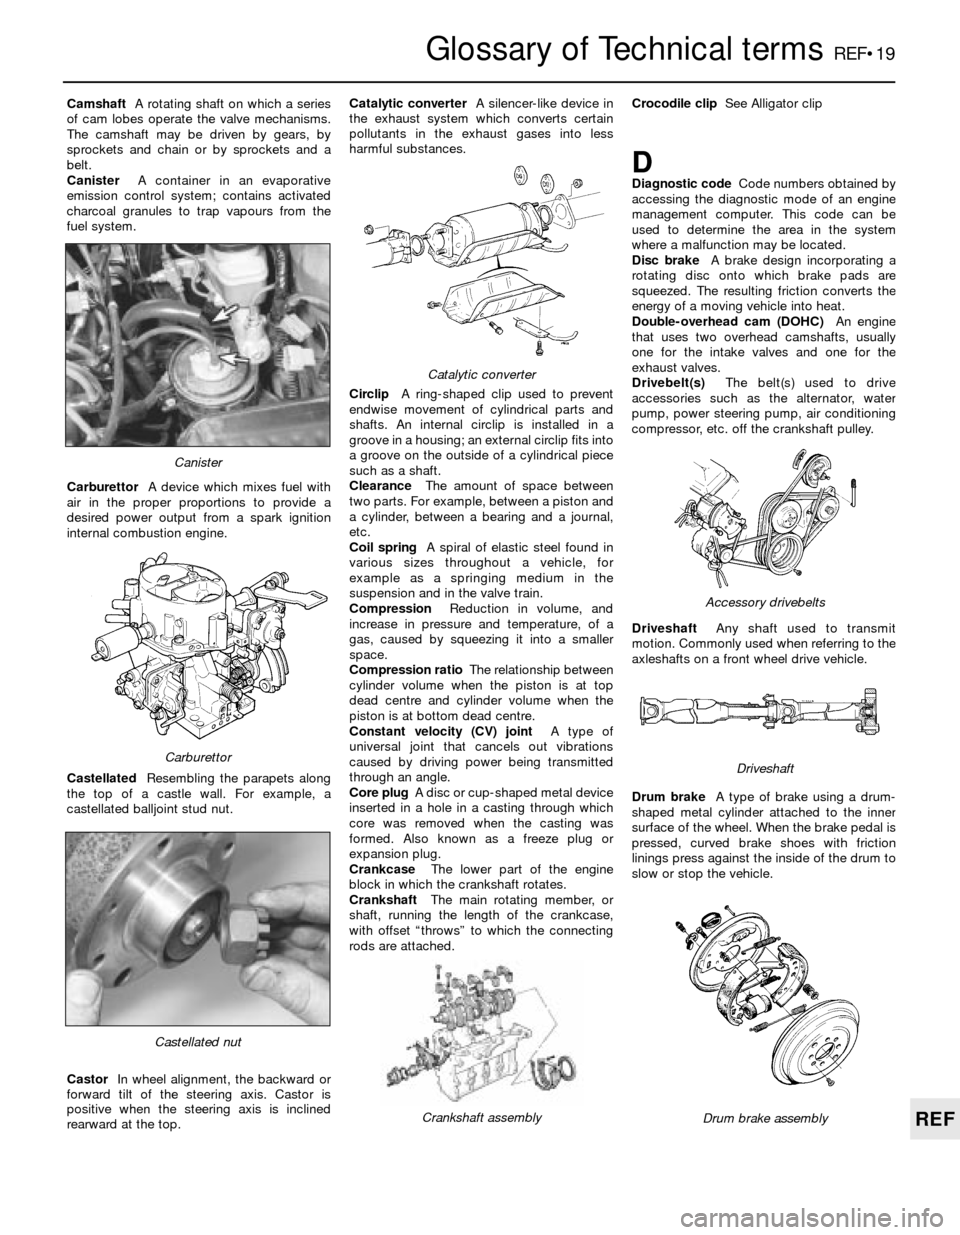 FORD SIERRA 1988 2.G Reference Workshop Manual Glossary of Technical termsREF•19
REF
CamshaftA rotating shaft on which a series
of cam lobes operate the valve mechanisms.
The camshaft may be driven by gears, by
sprockets and chain or by sprocket